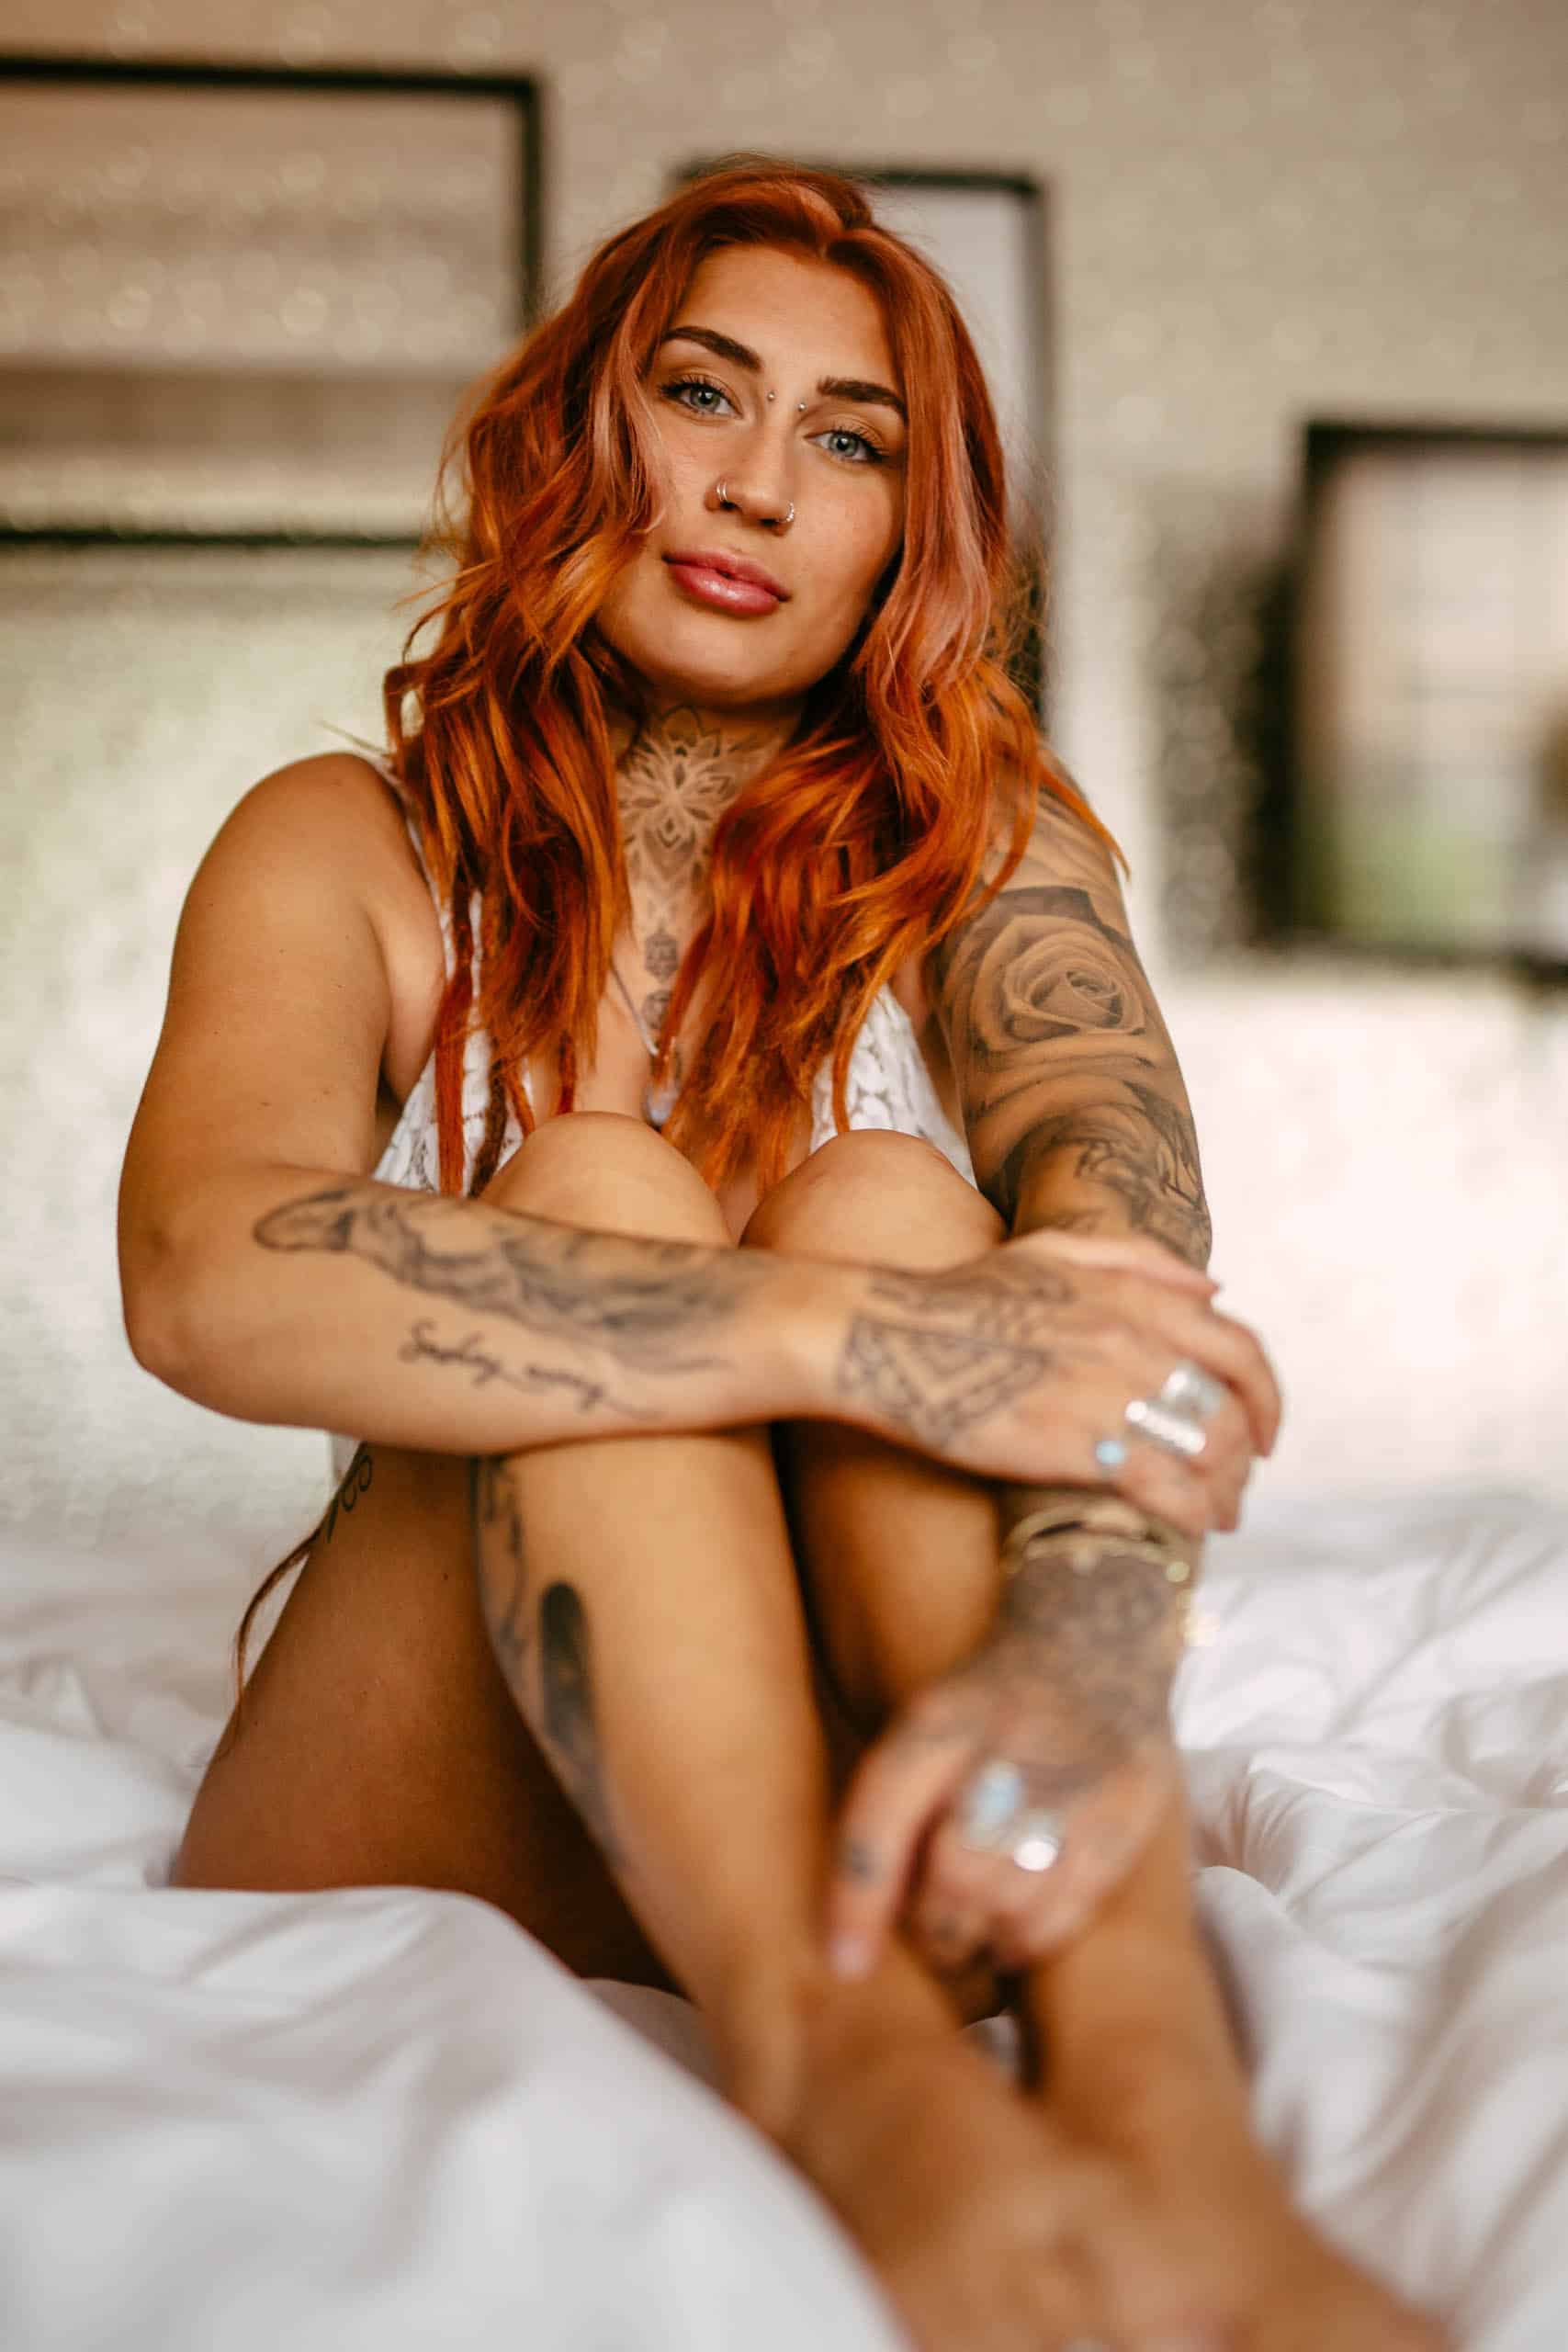 A woman with red hair sitting on a bed during a boudoir shoot in Hoek van Holland, showing off her beautiful tattoos.